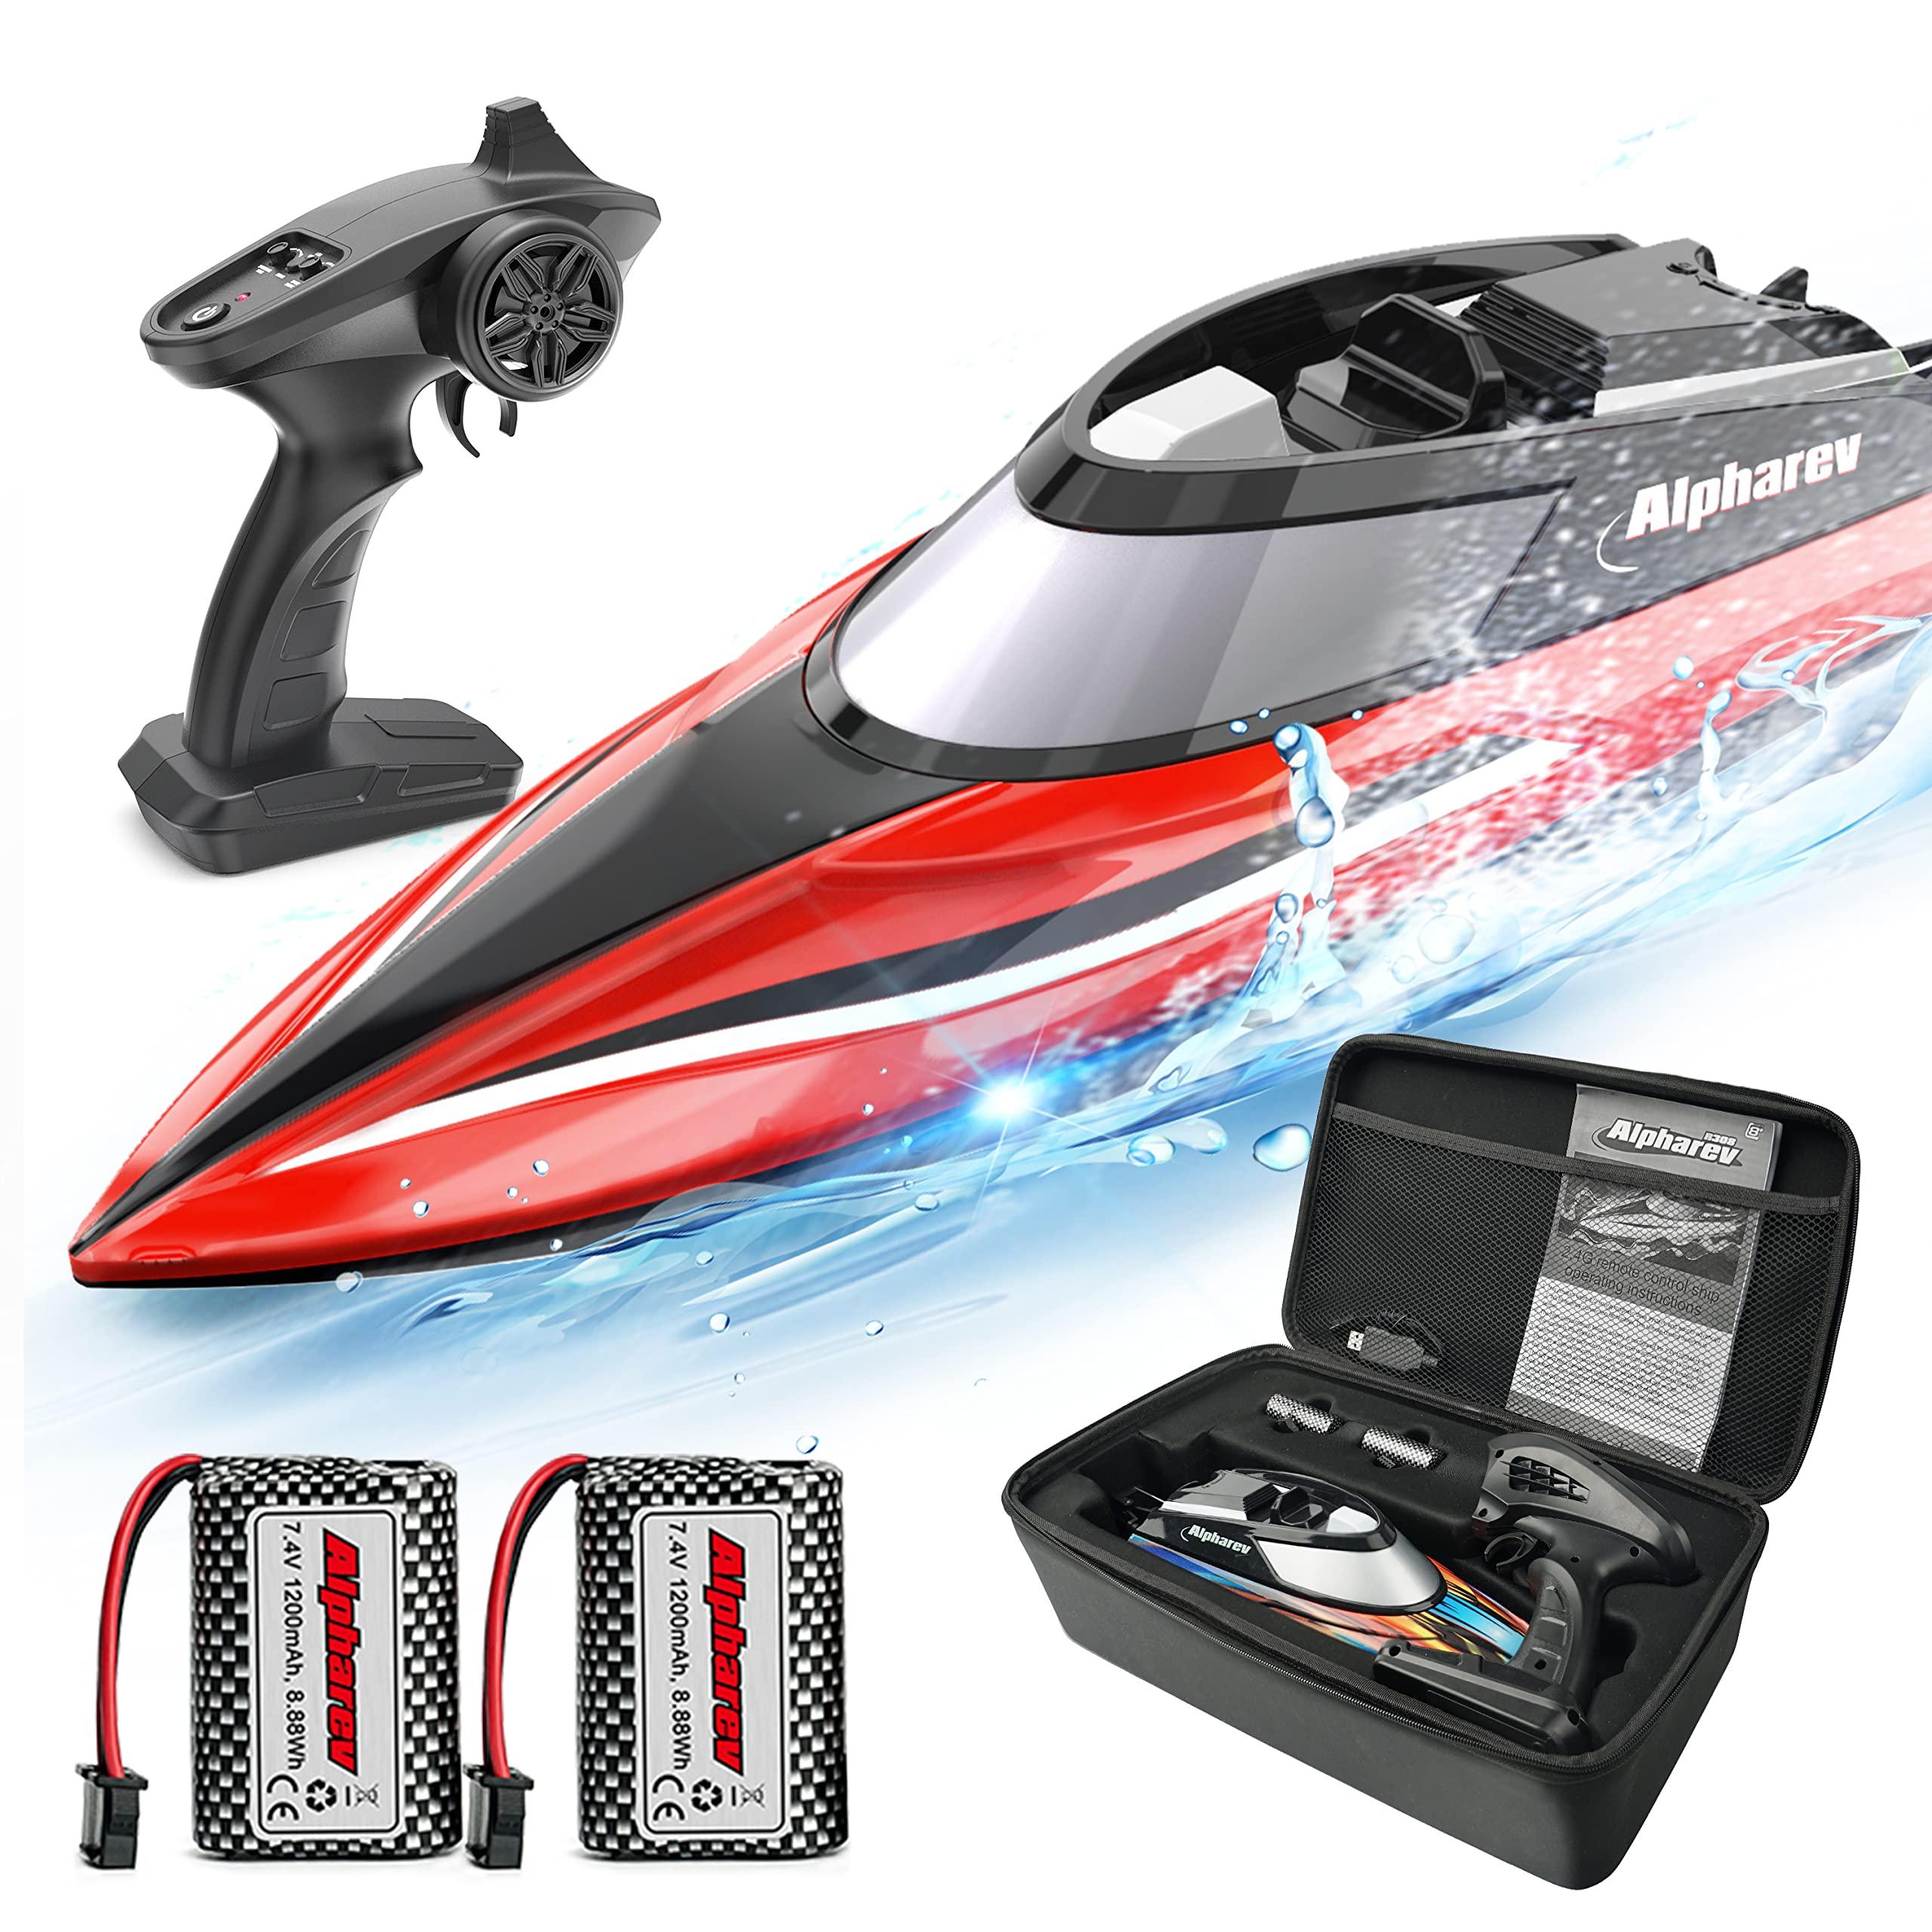 Alpharev Boat: The Ultimate Water Sports Vessel: Alpharev Boat Features for Adventure and Comfort